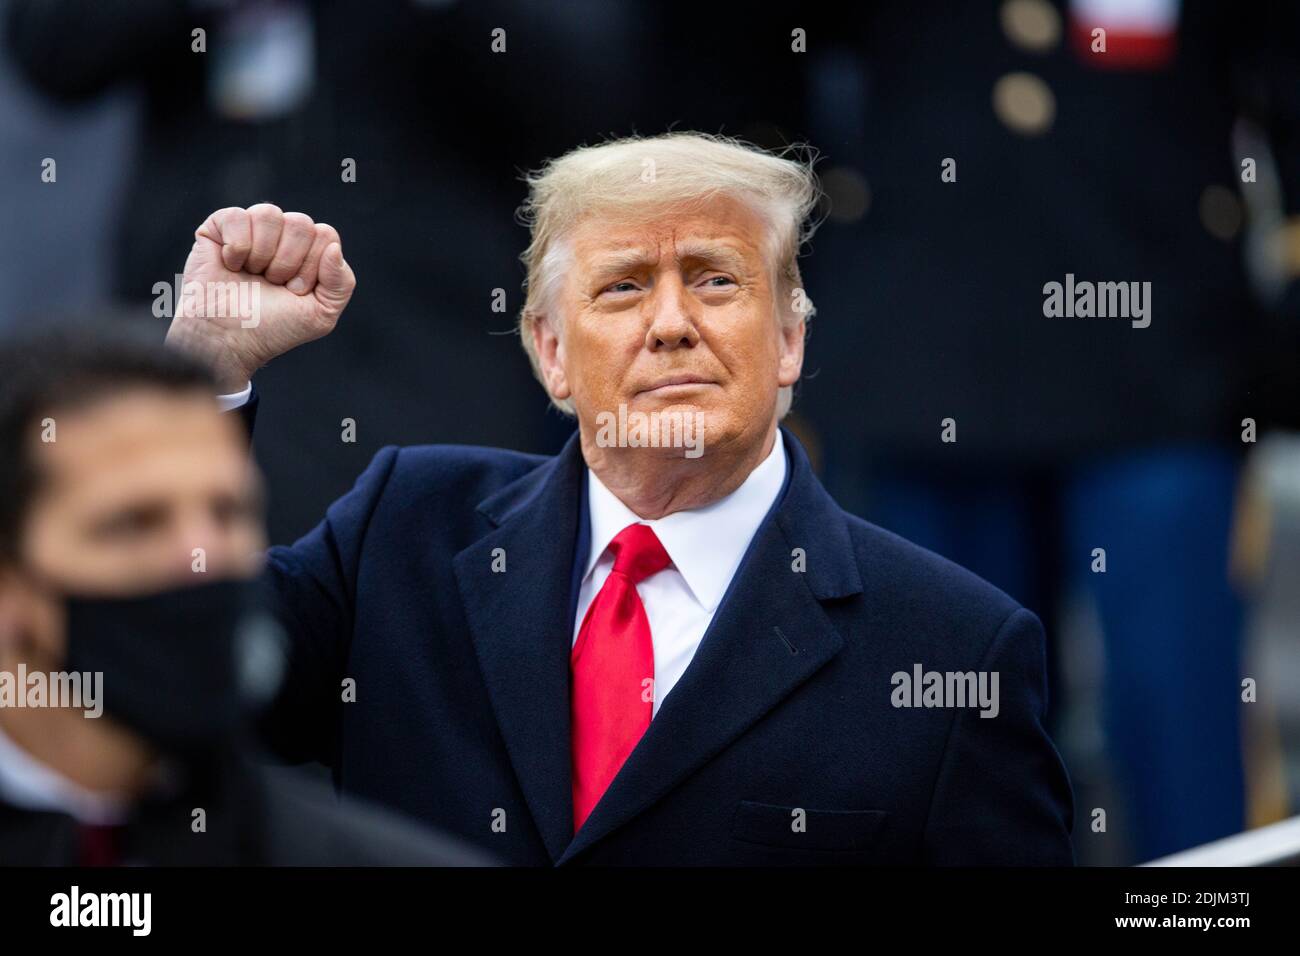 U.S. President Donald Trump holds up his fist as he arrives along the side-lines to visit with Army fans at the 121st Army-Navy football game at Michie Stadium December 12, 2019 in West Point, New York. The Army Black Knights shutout the Navy Midshipmen 15-0. Stock Photo